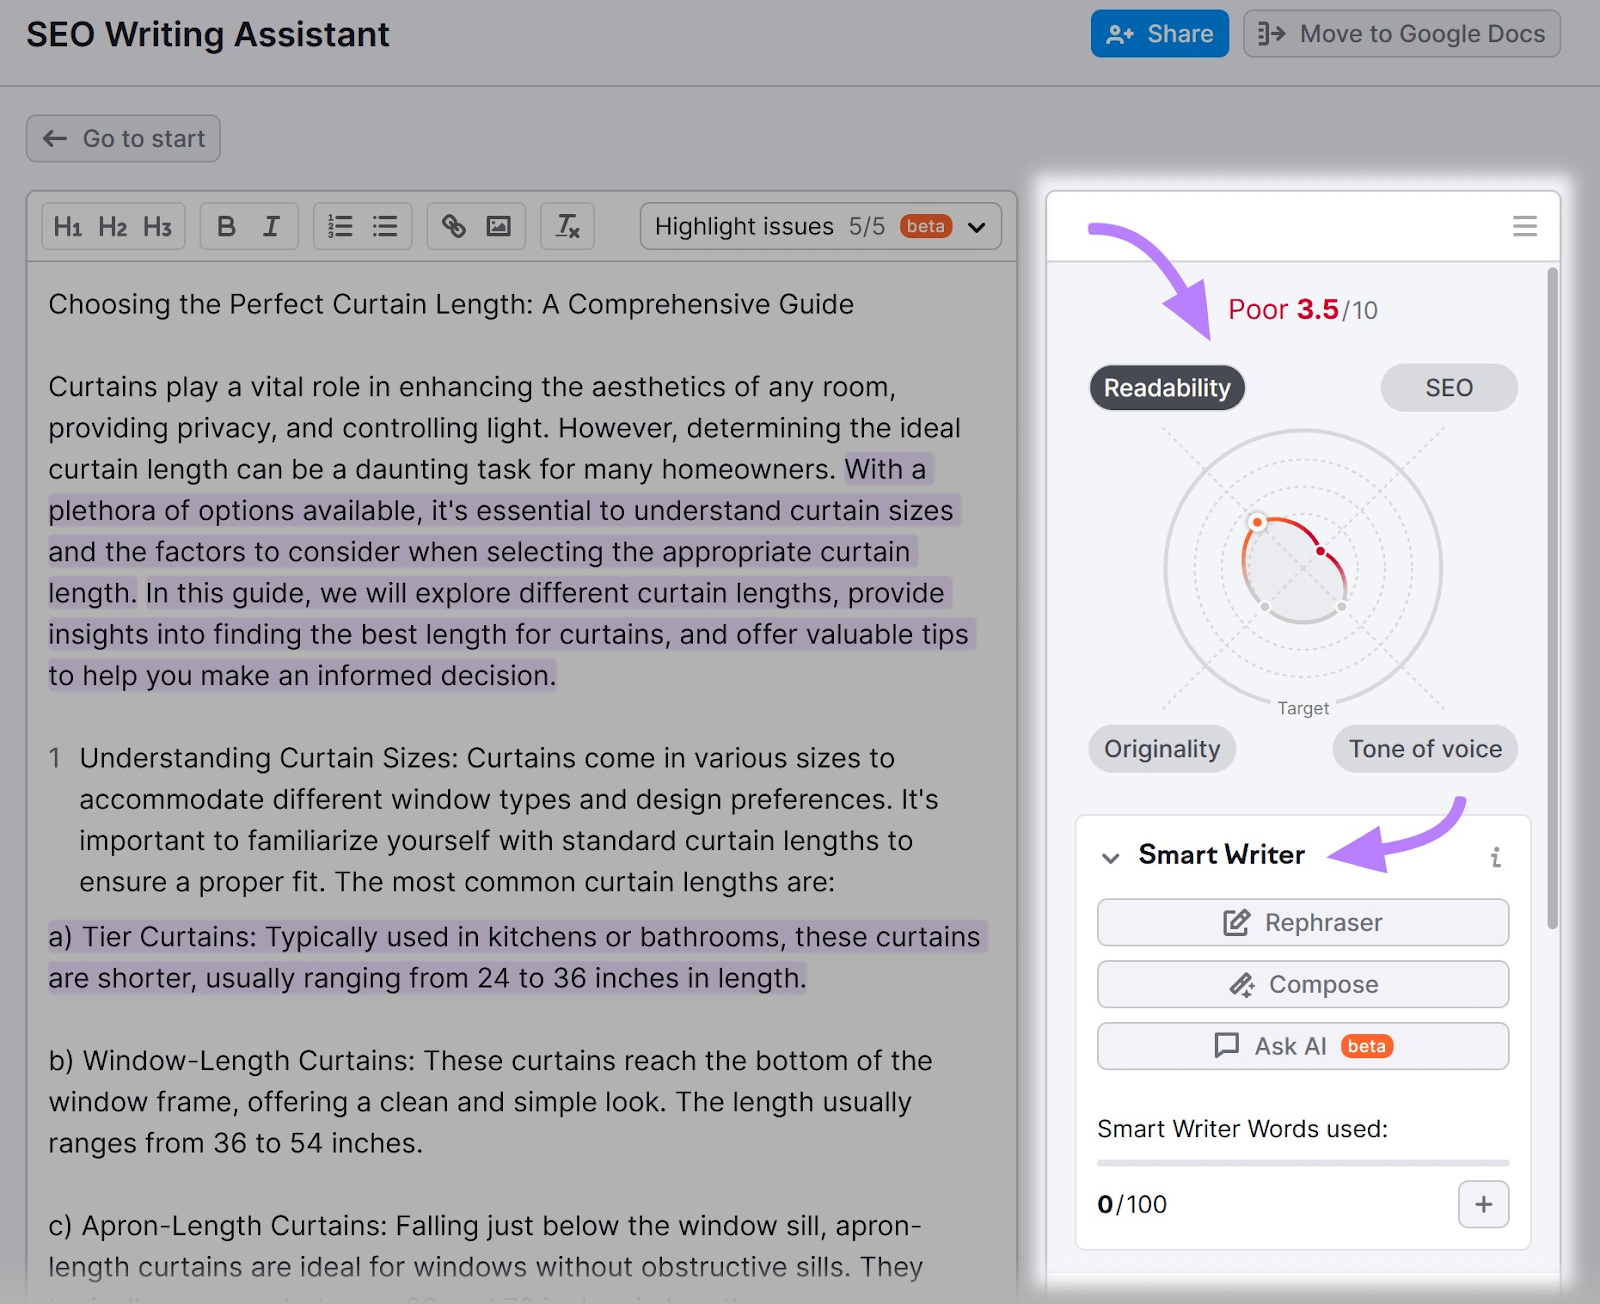 metrics in SEO Writing Assistant with Smart Writer highlighted